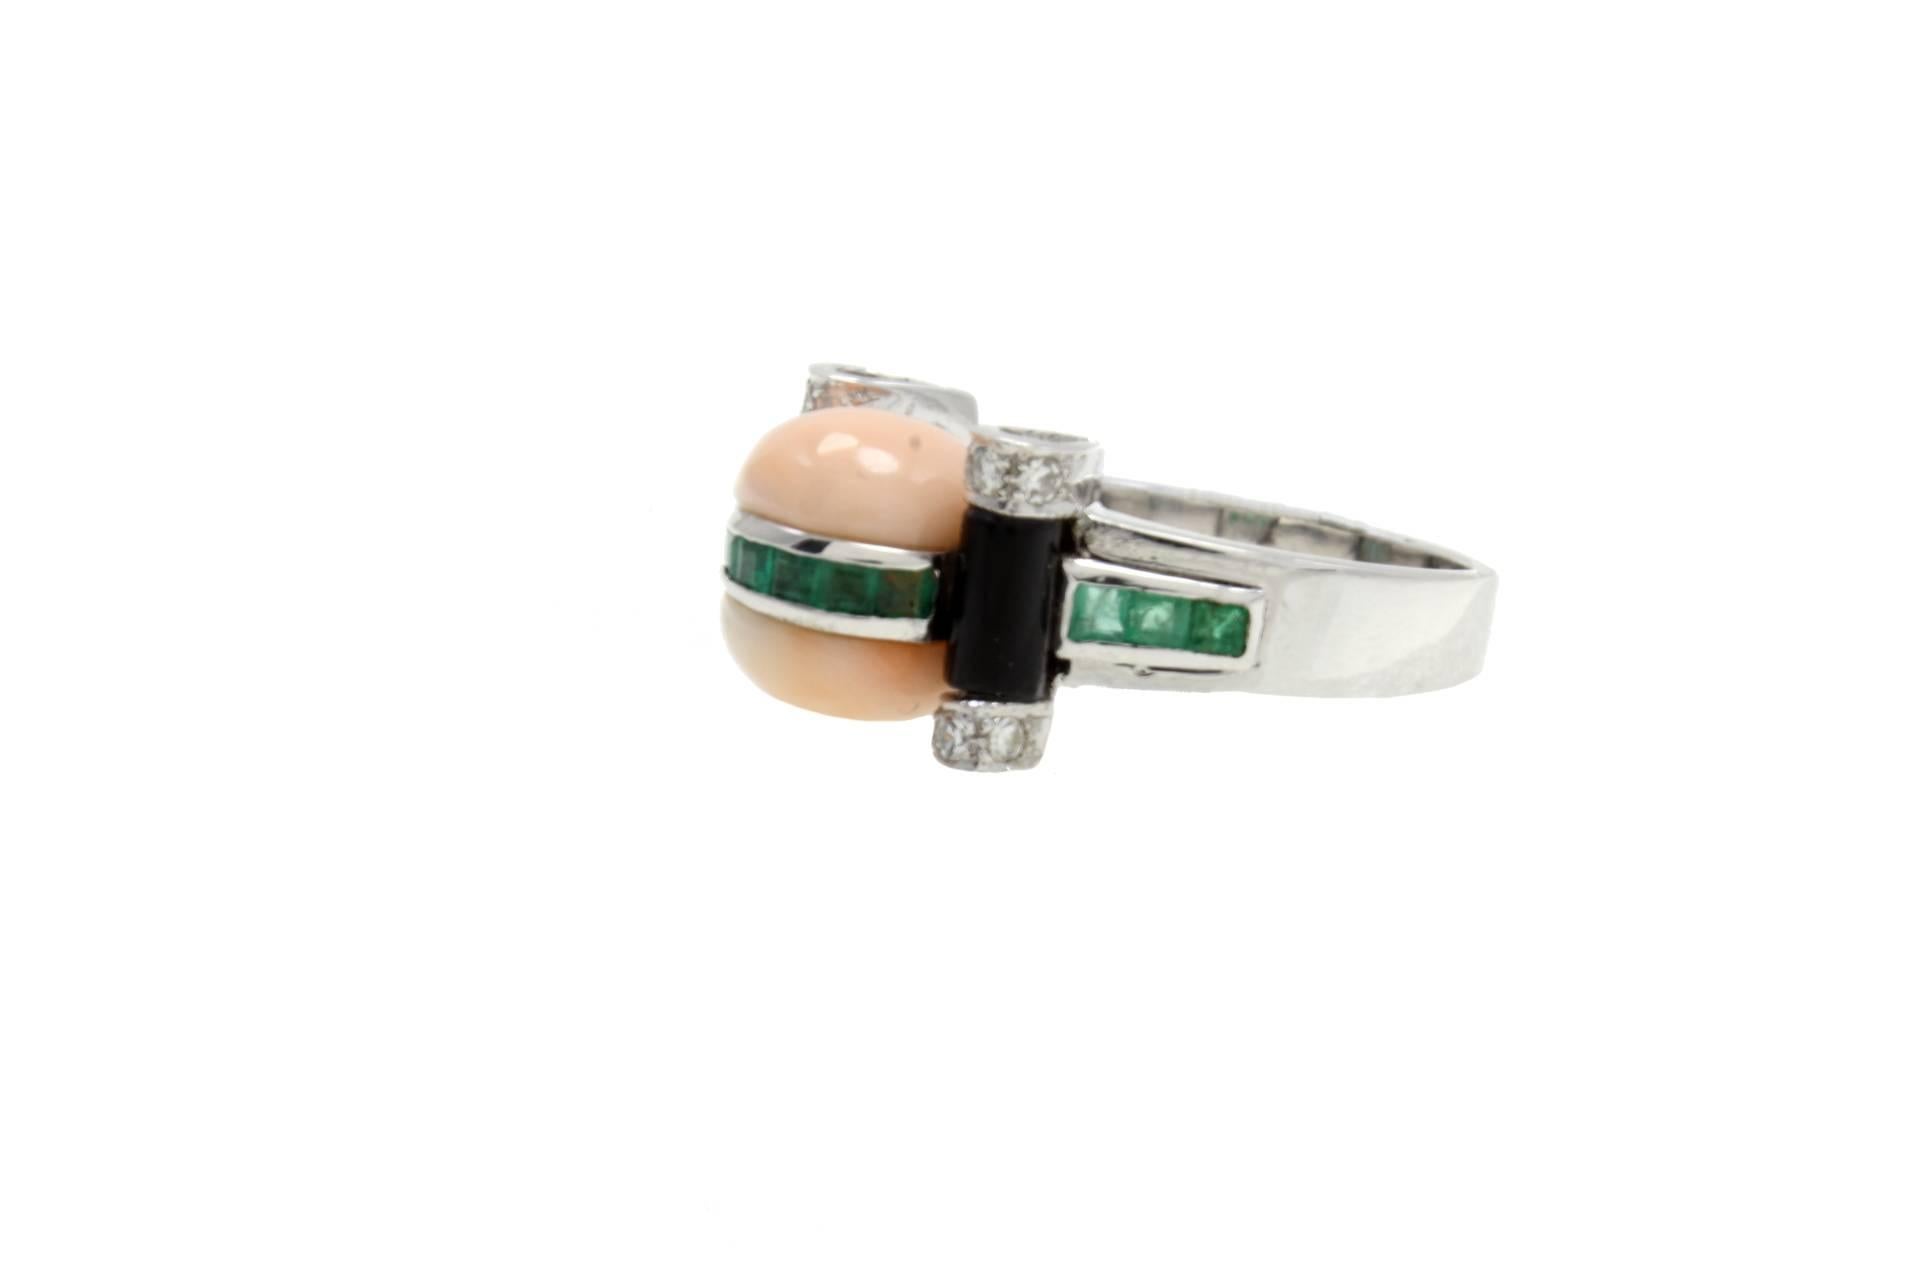 Shapely ring in 14kt white gold composed of a central coral dome embellished with emeralds and two stripes of onyx and diamonds. You can't resist to wear it!

diamonds 0.29kt
emerald 0.69kt
onyx 0.30gr
coral 1.20gr
tot weight 8.8gr
r.f.  ufgc